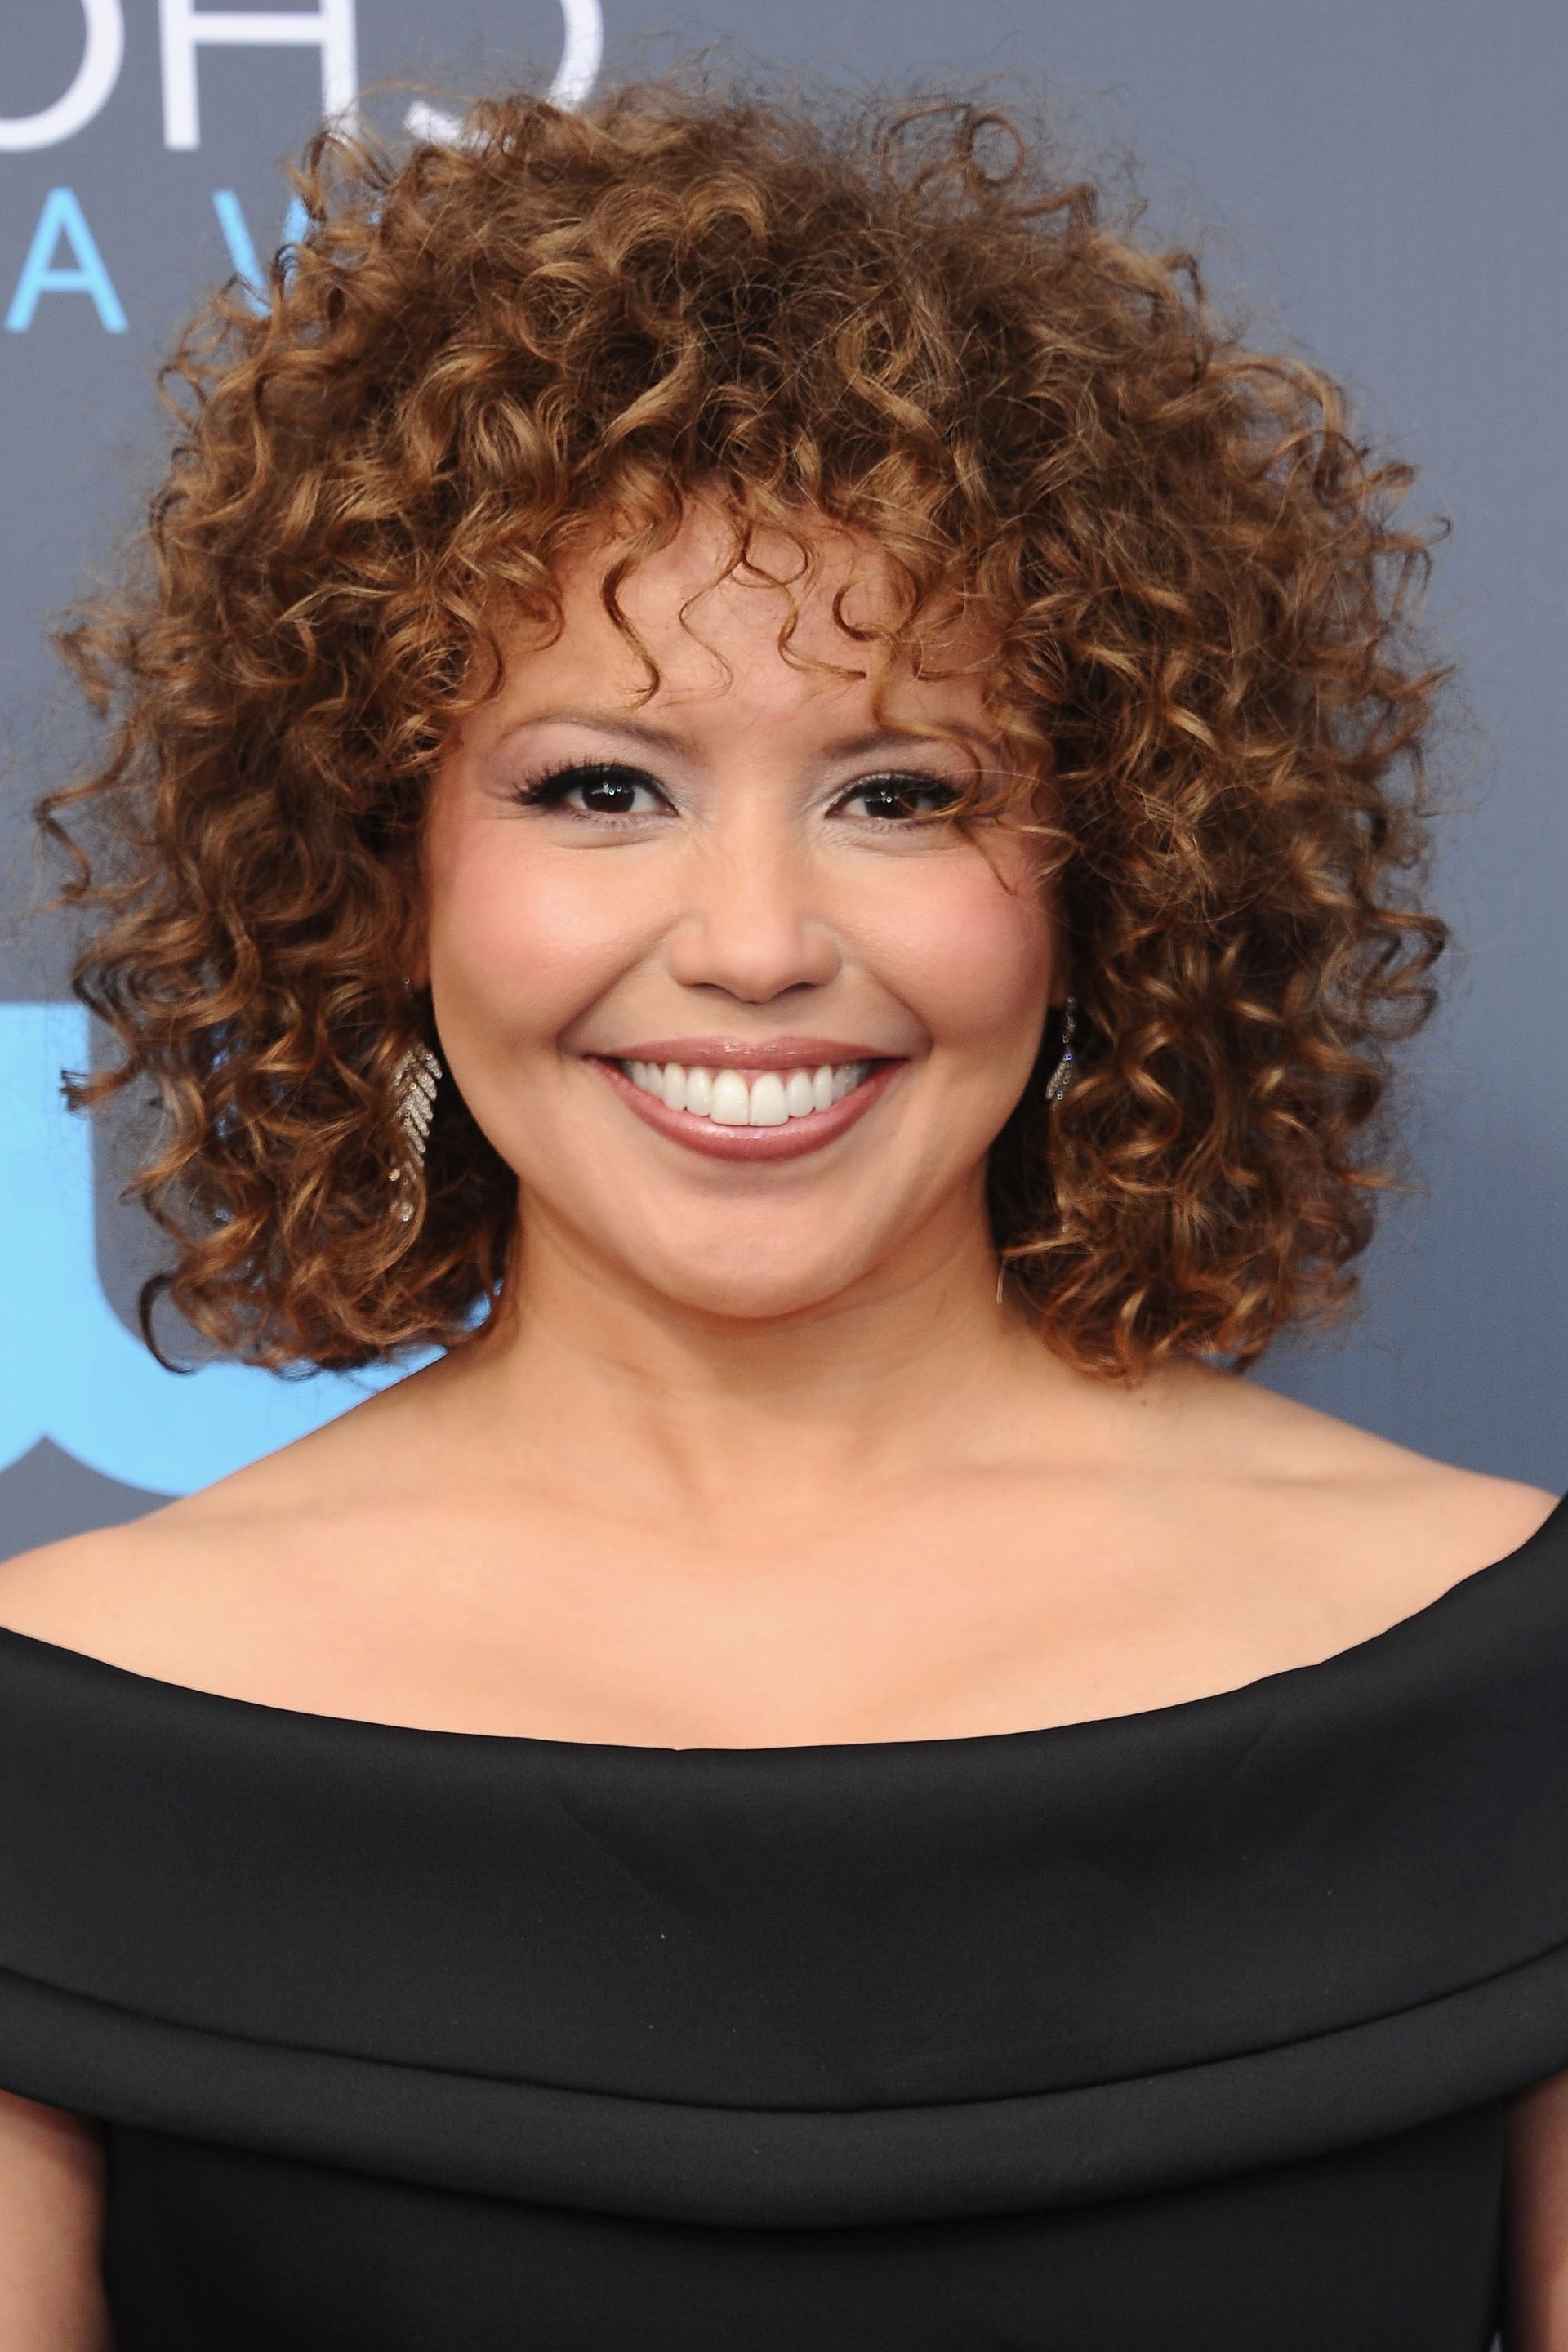 20 Celebrity Short Curly Hair Ideas – Short Haircuts And Hairstyles For Short Haircuts With Curly Hair (View 12 of 25)